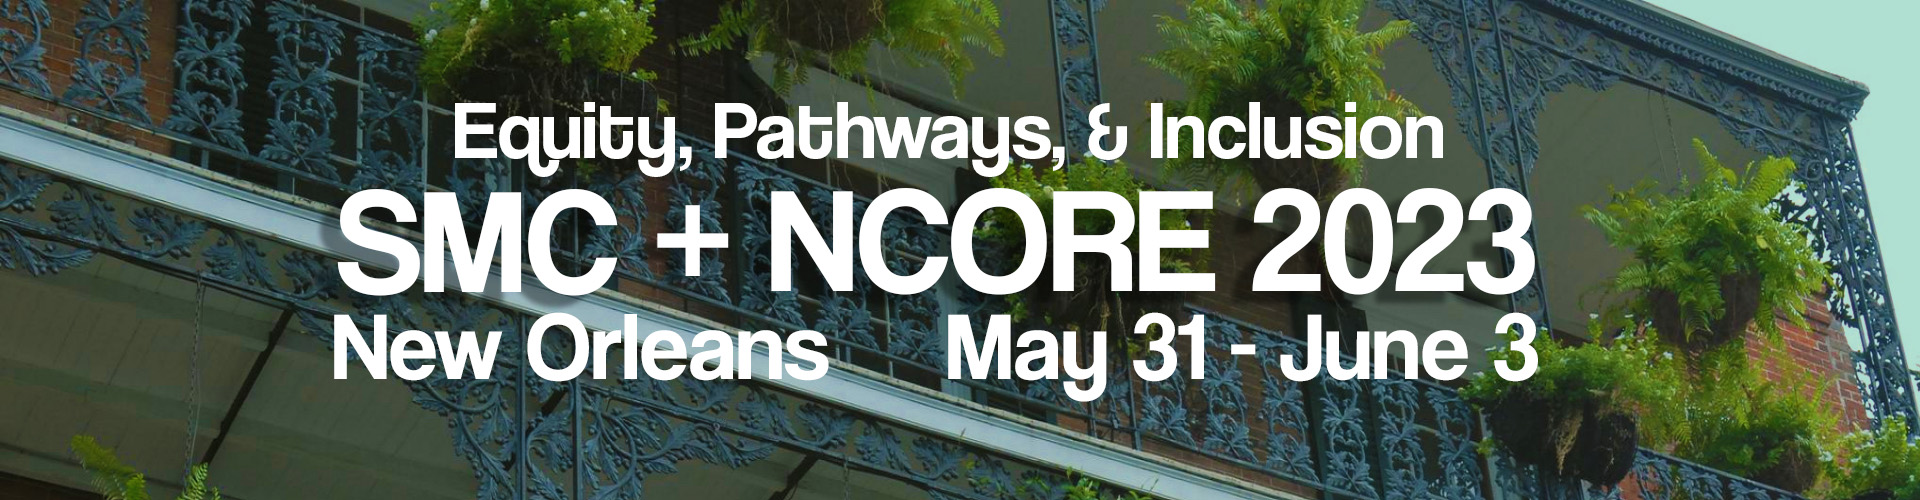 Image of iron bars on plant-covered New Orleans balcony with NCORE + SMC text on top of it